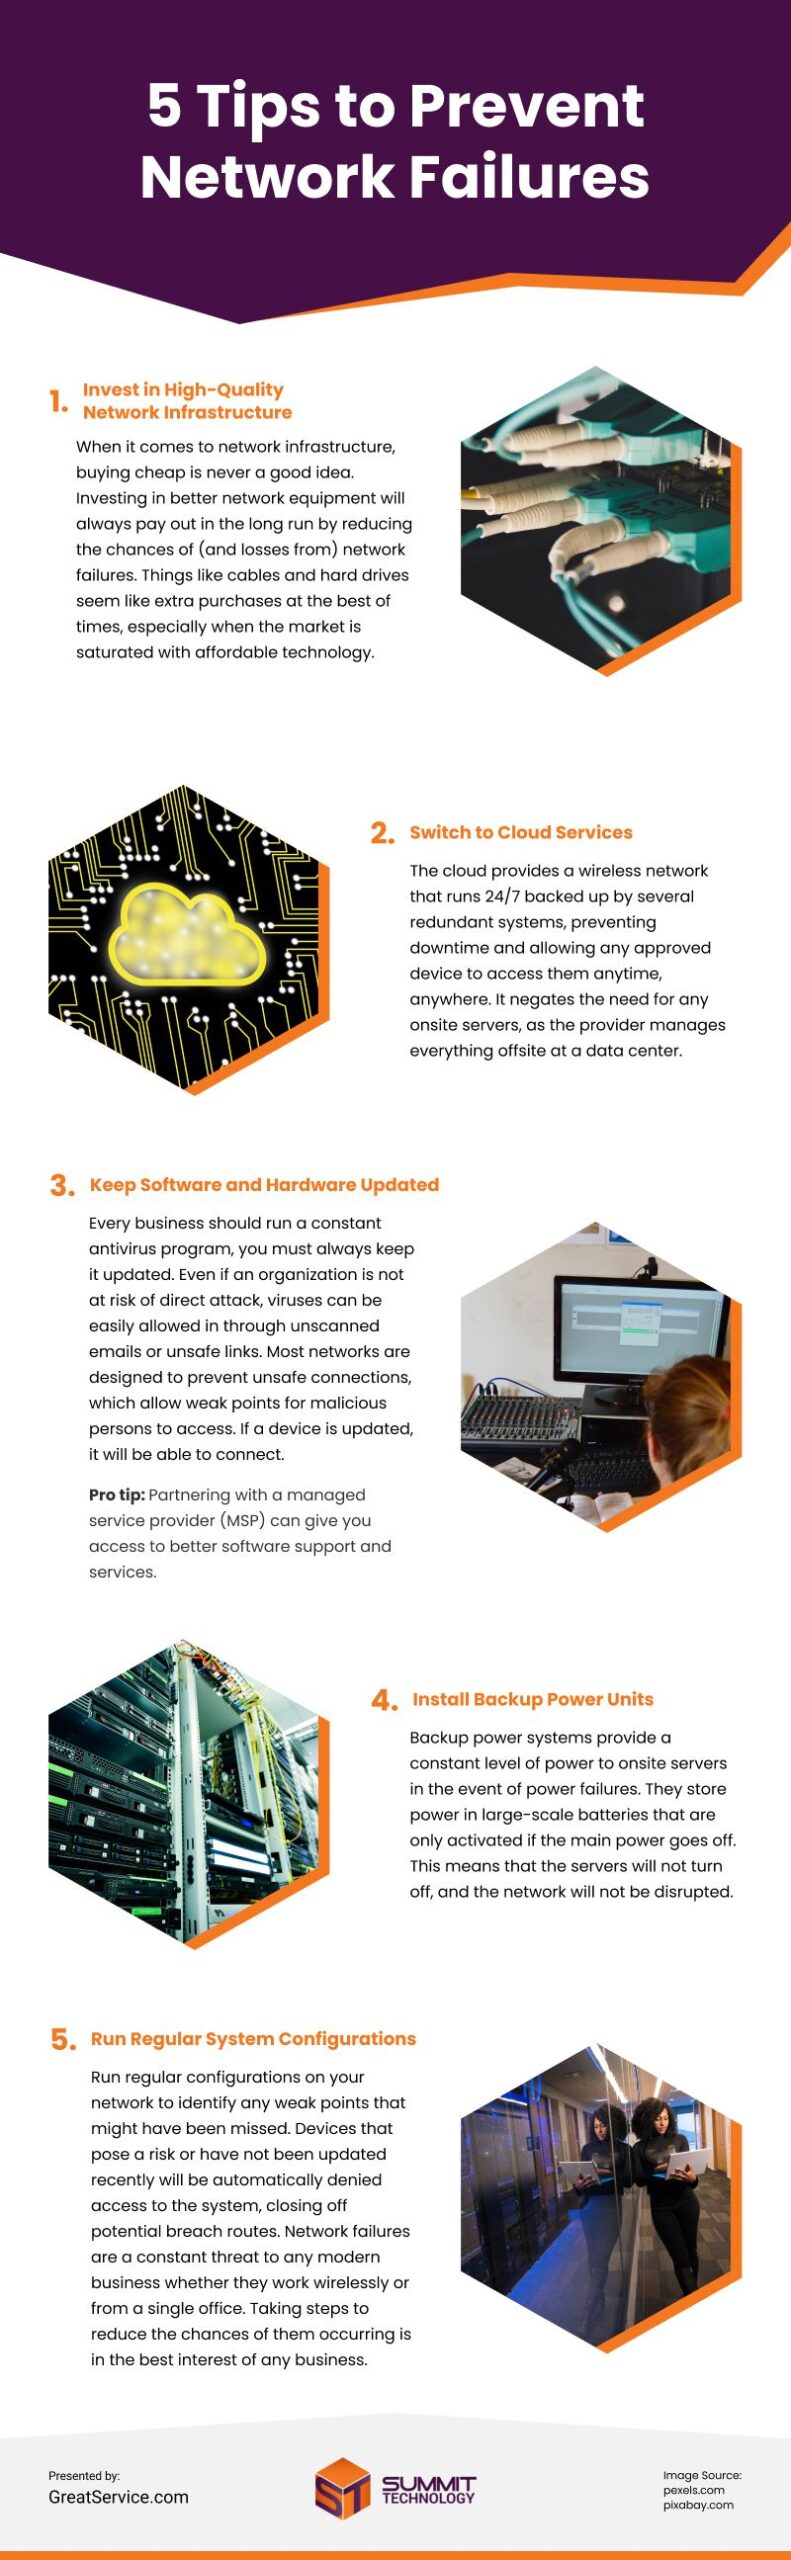 5 Tips to Prevent Network Failures Infographic